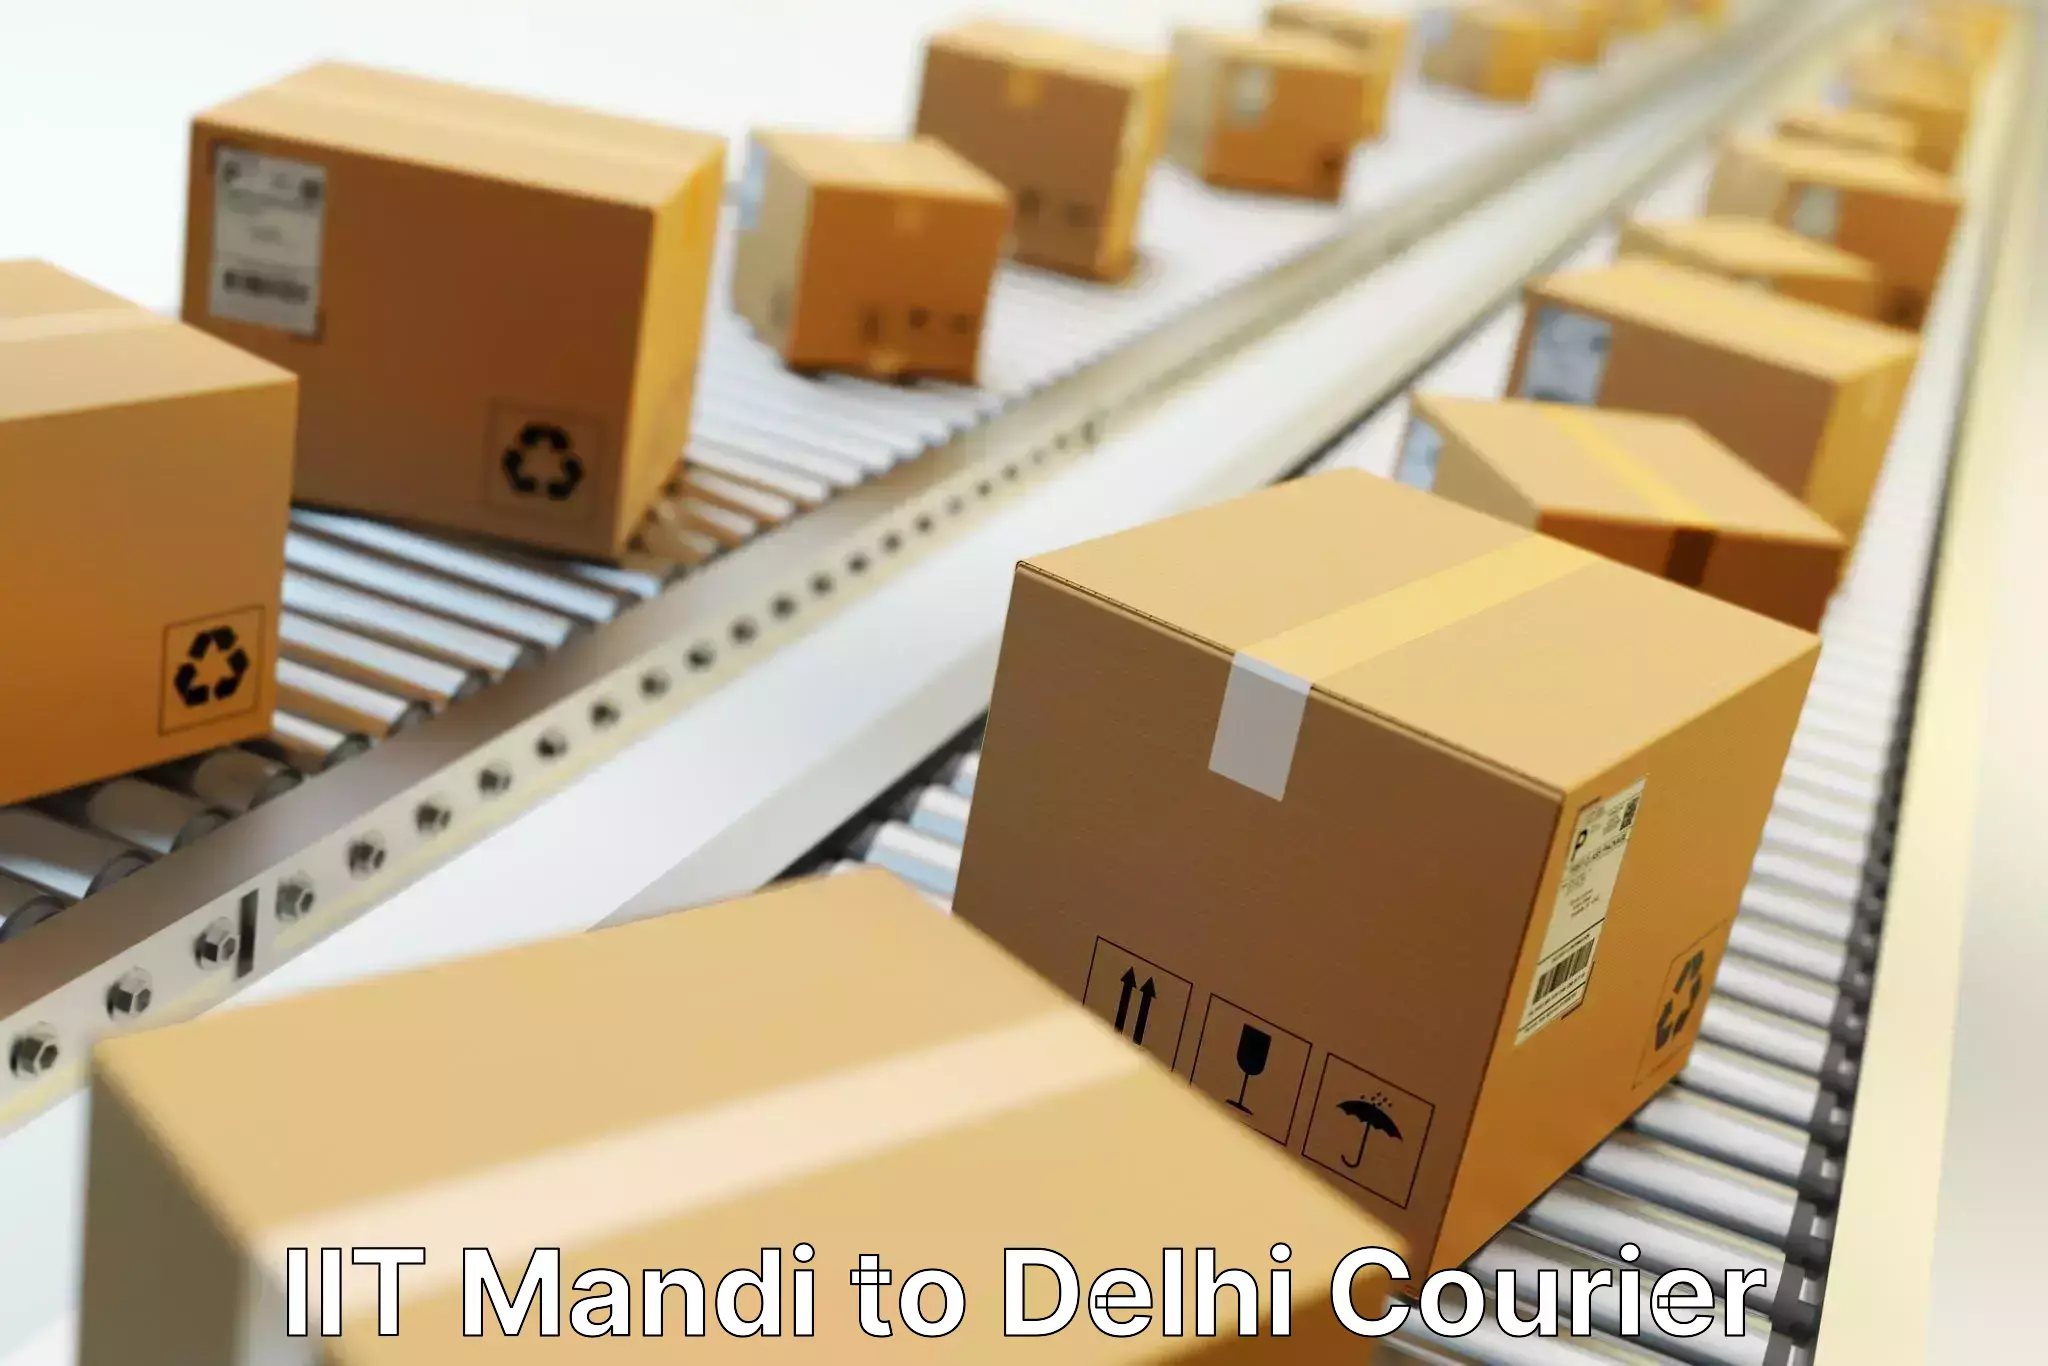 Affordable parcel service IIT Mandi to NCR